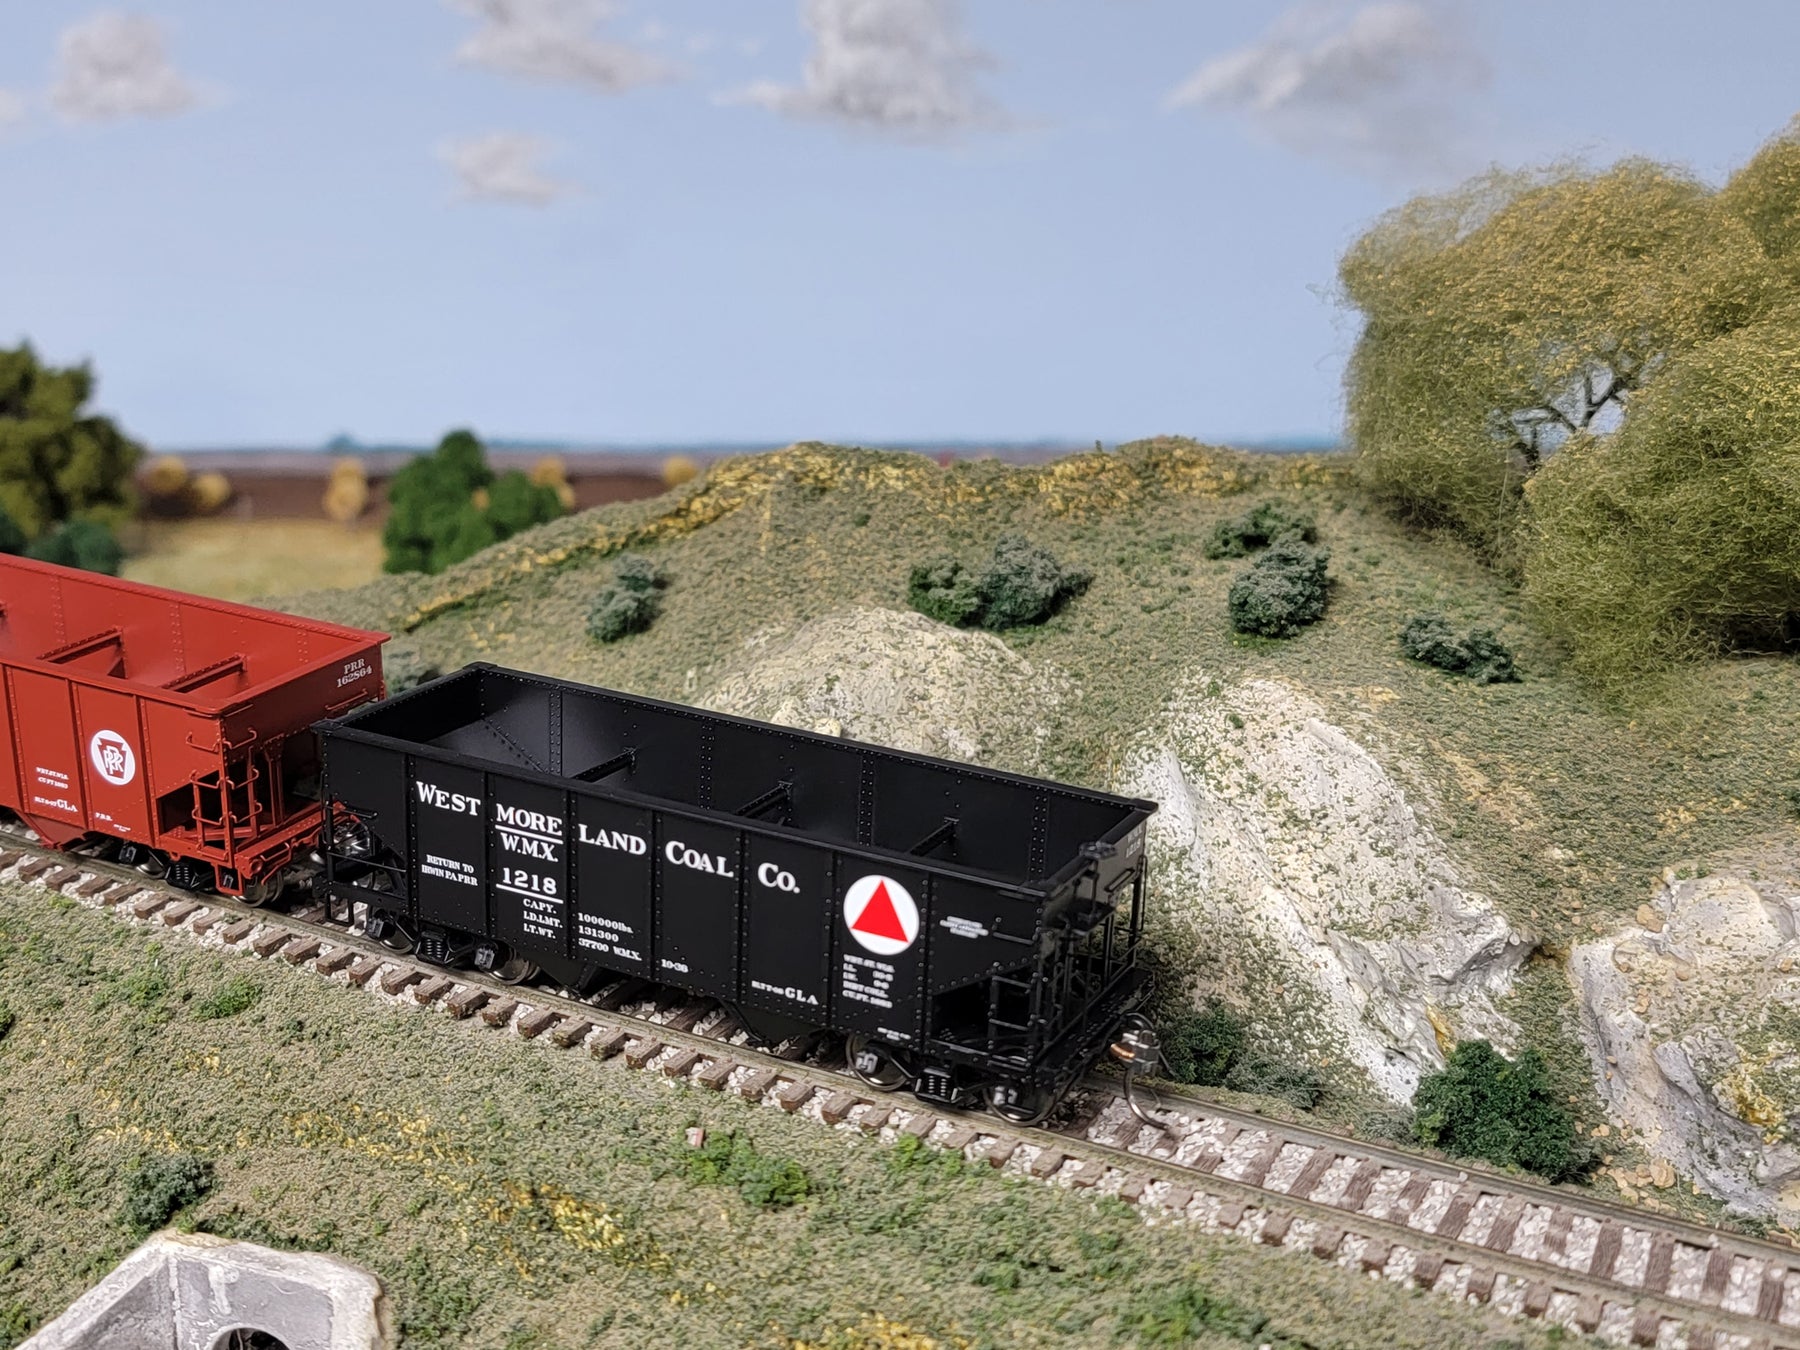 The HO Scale GLa hoppers from Rapido Trains have arrived!